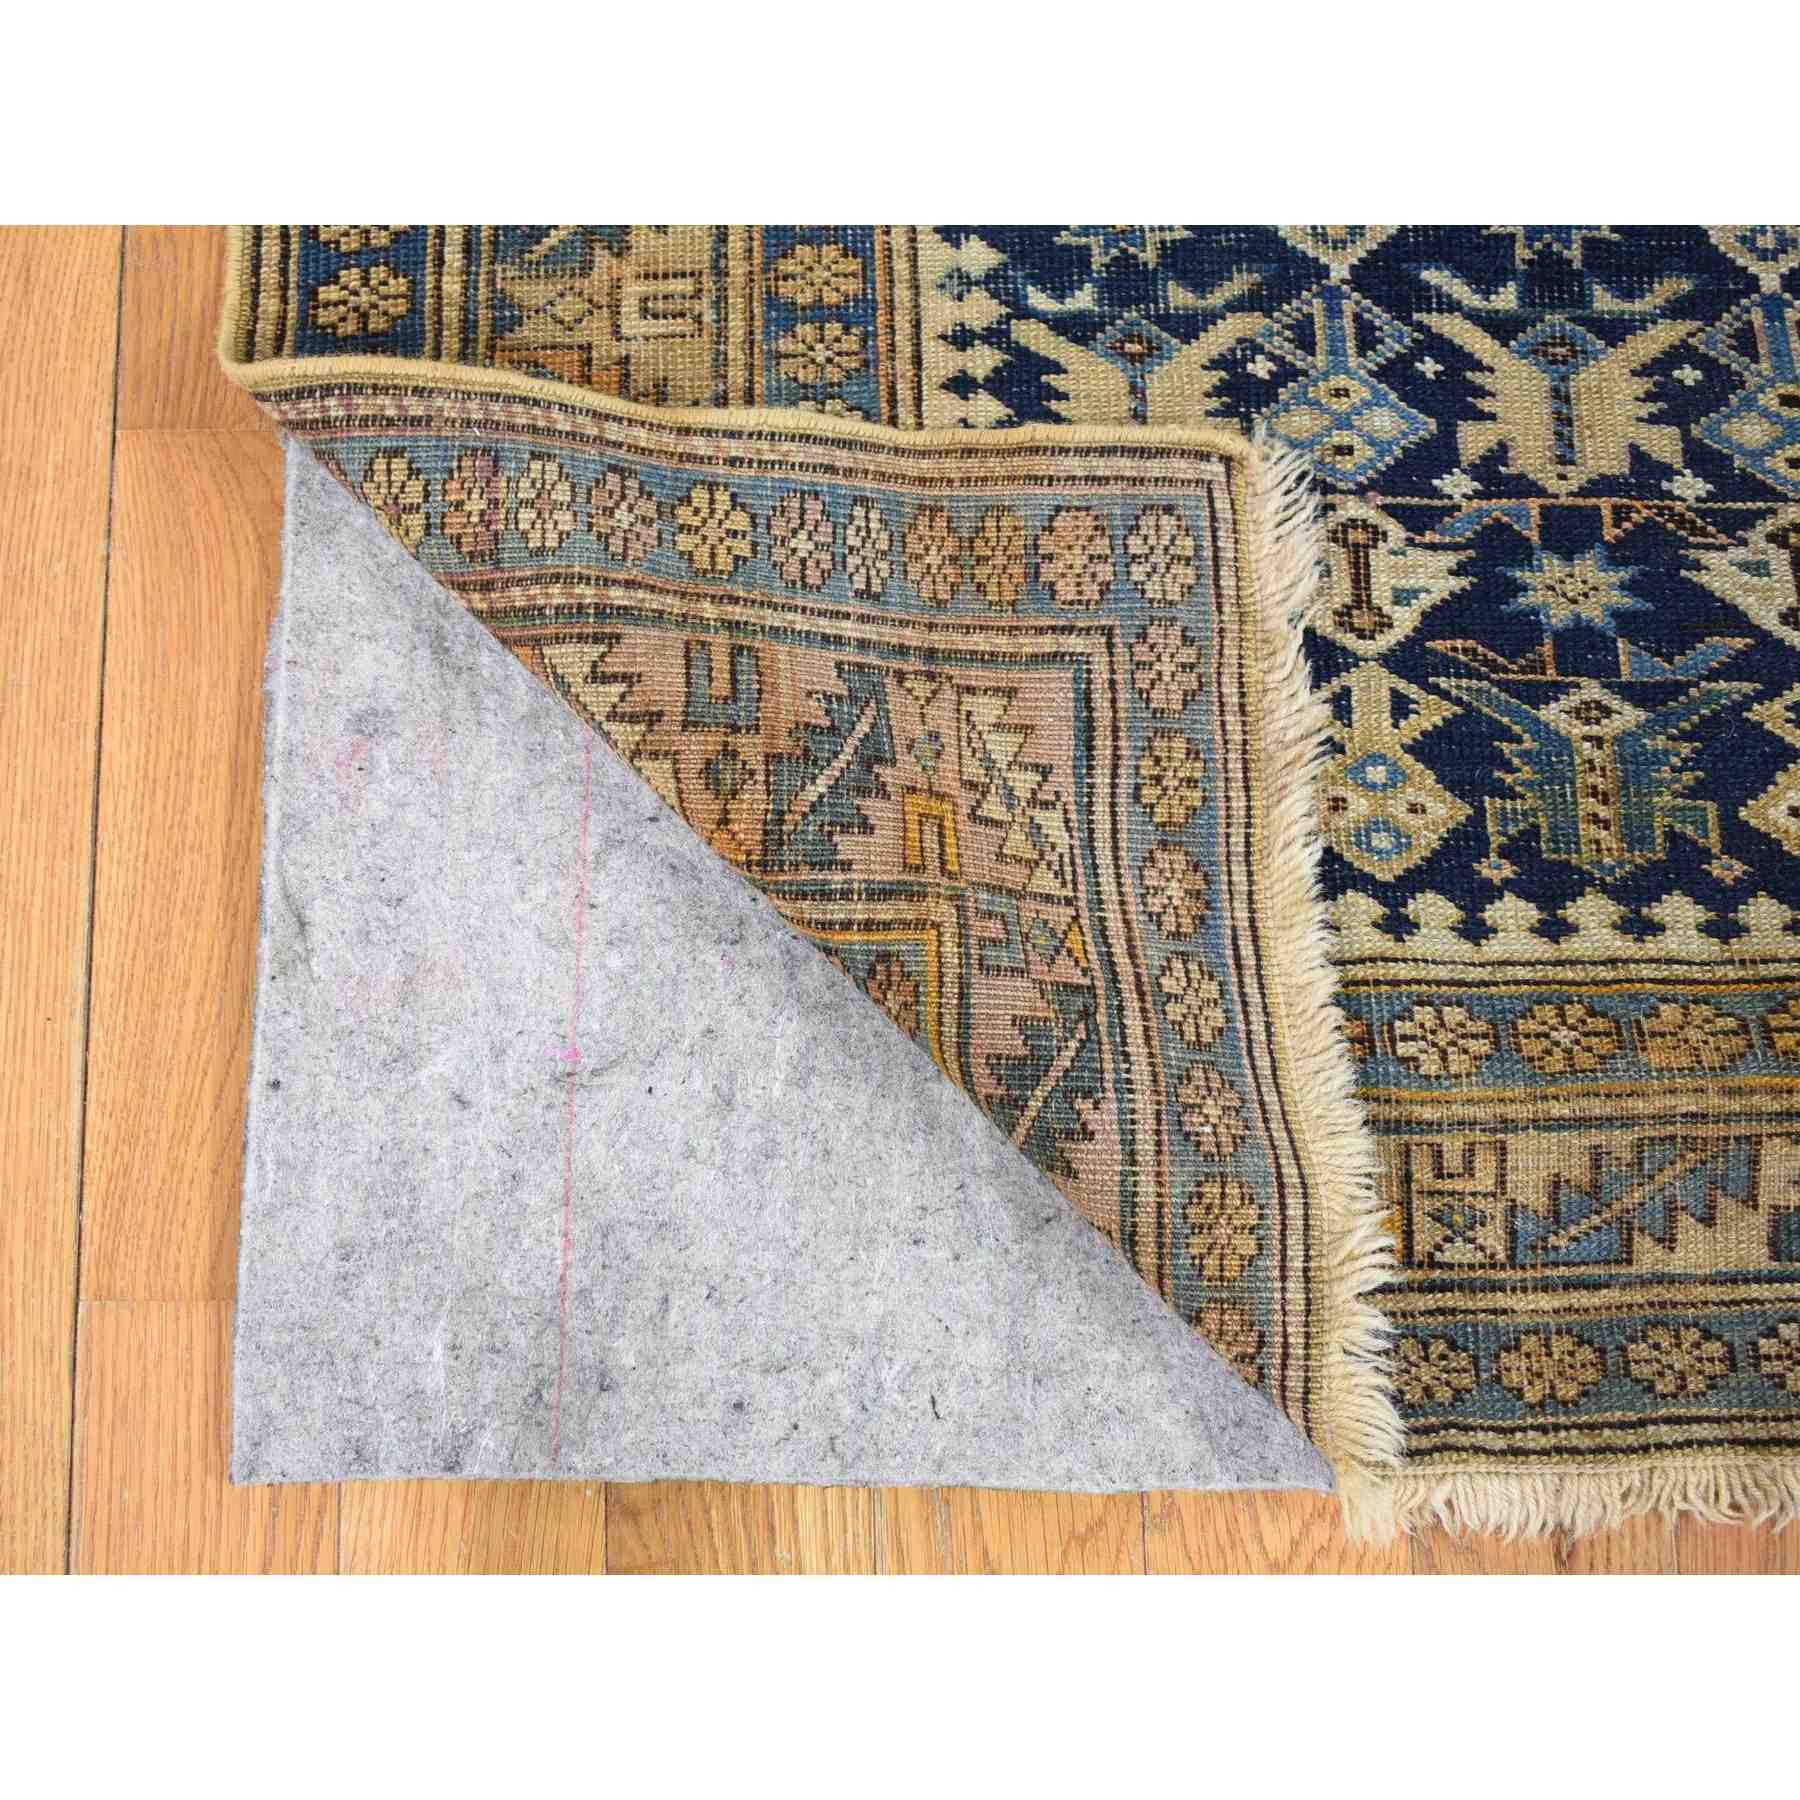 Antique-Hand-Knotted-Rug-400575